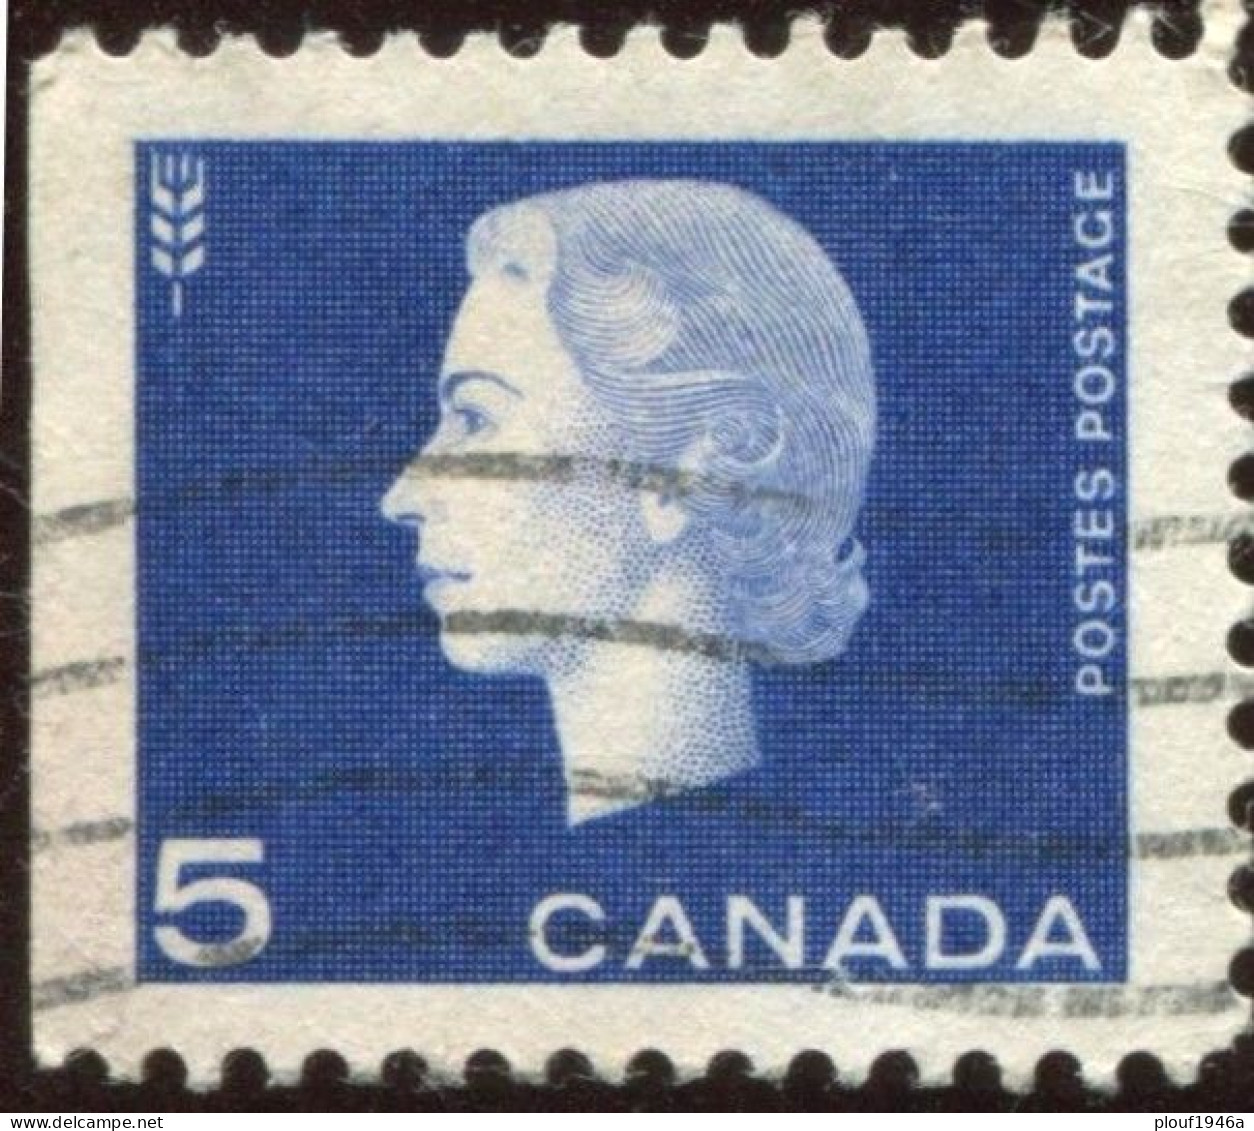 Pays :  84,1 (Canada : Dominion)  Yvert Et Tellier N° :   332 - 4 (o) / Michel 352-Eyll - Single Stamps